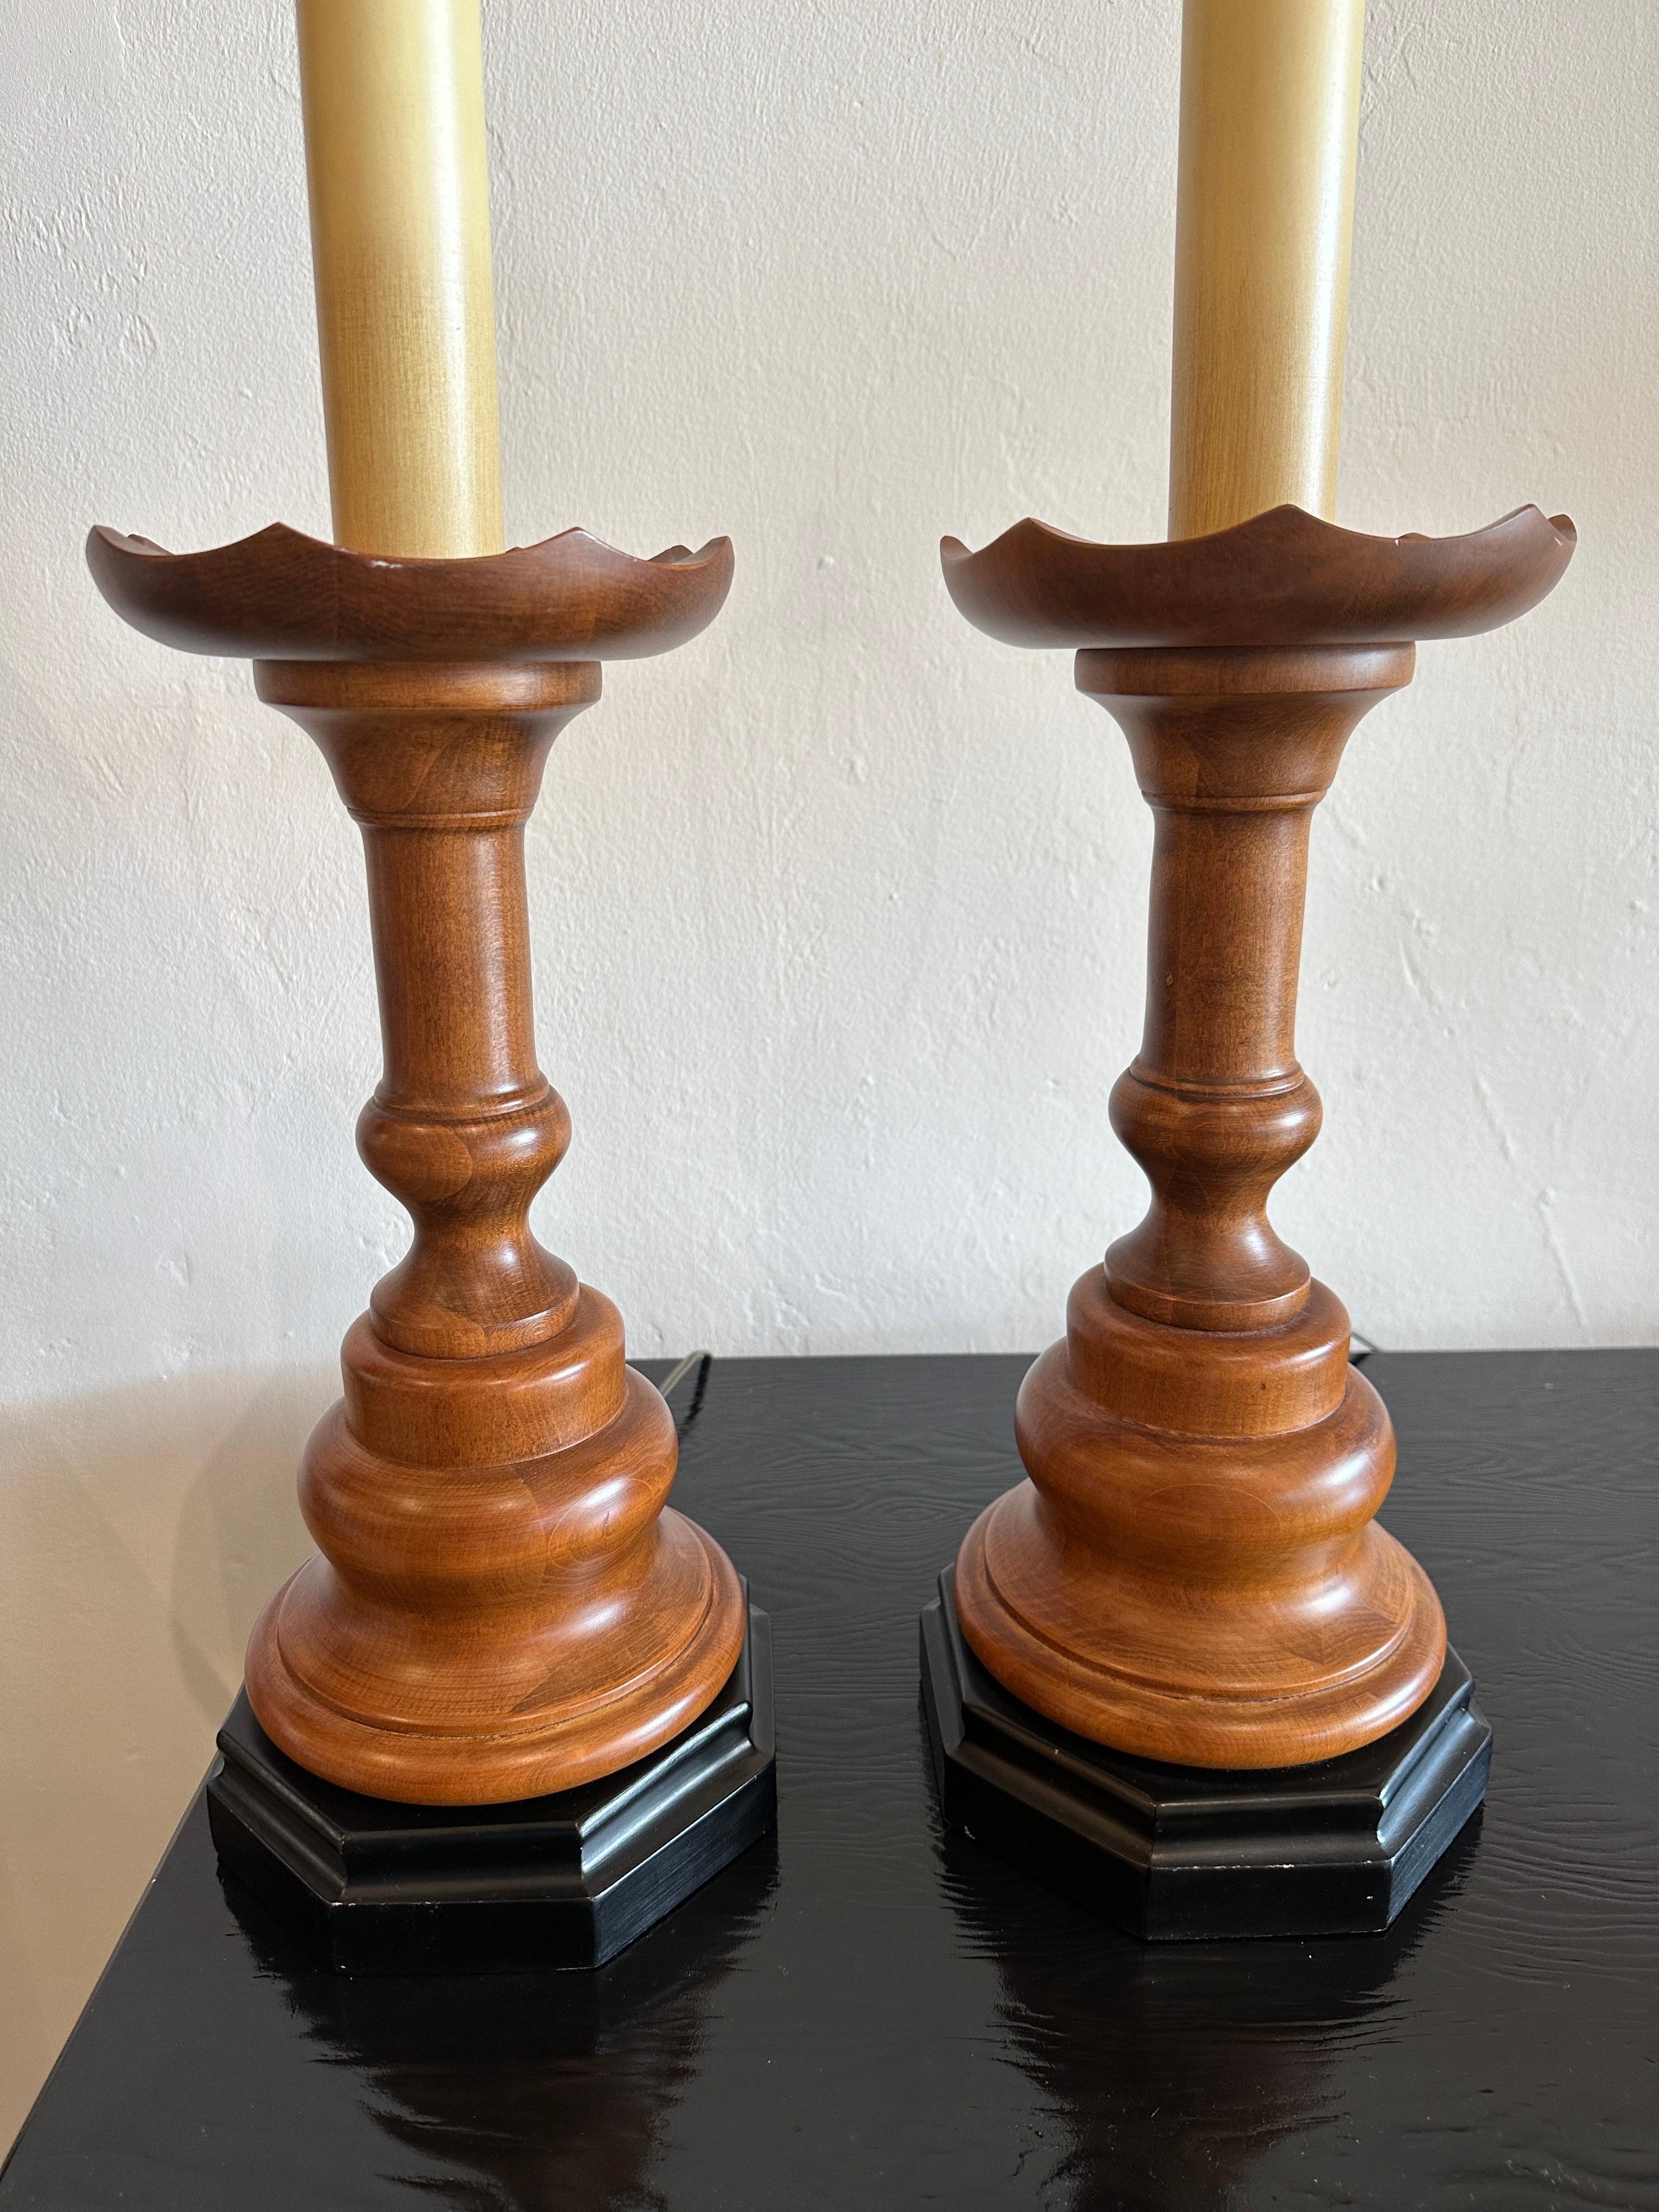 American Turned Wood Lamps with Chess Pawn Design, Pair For Sale